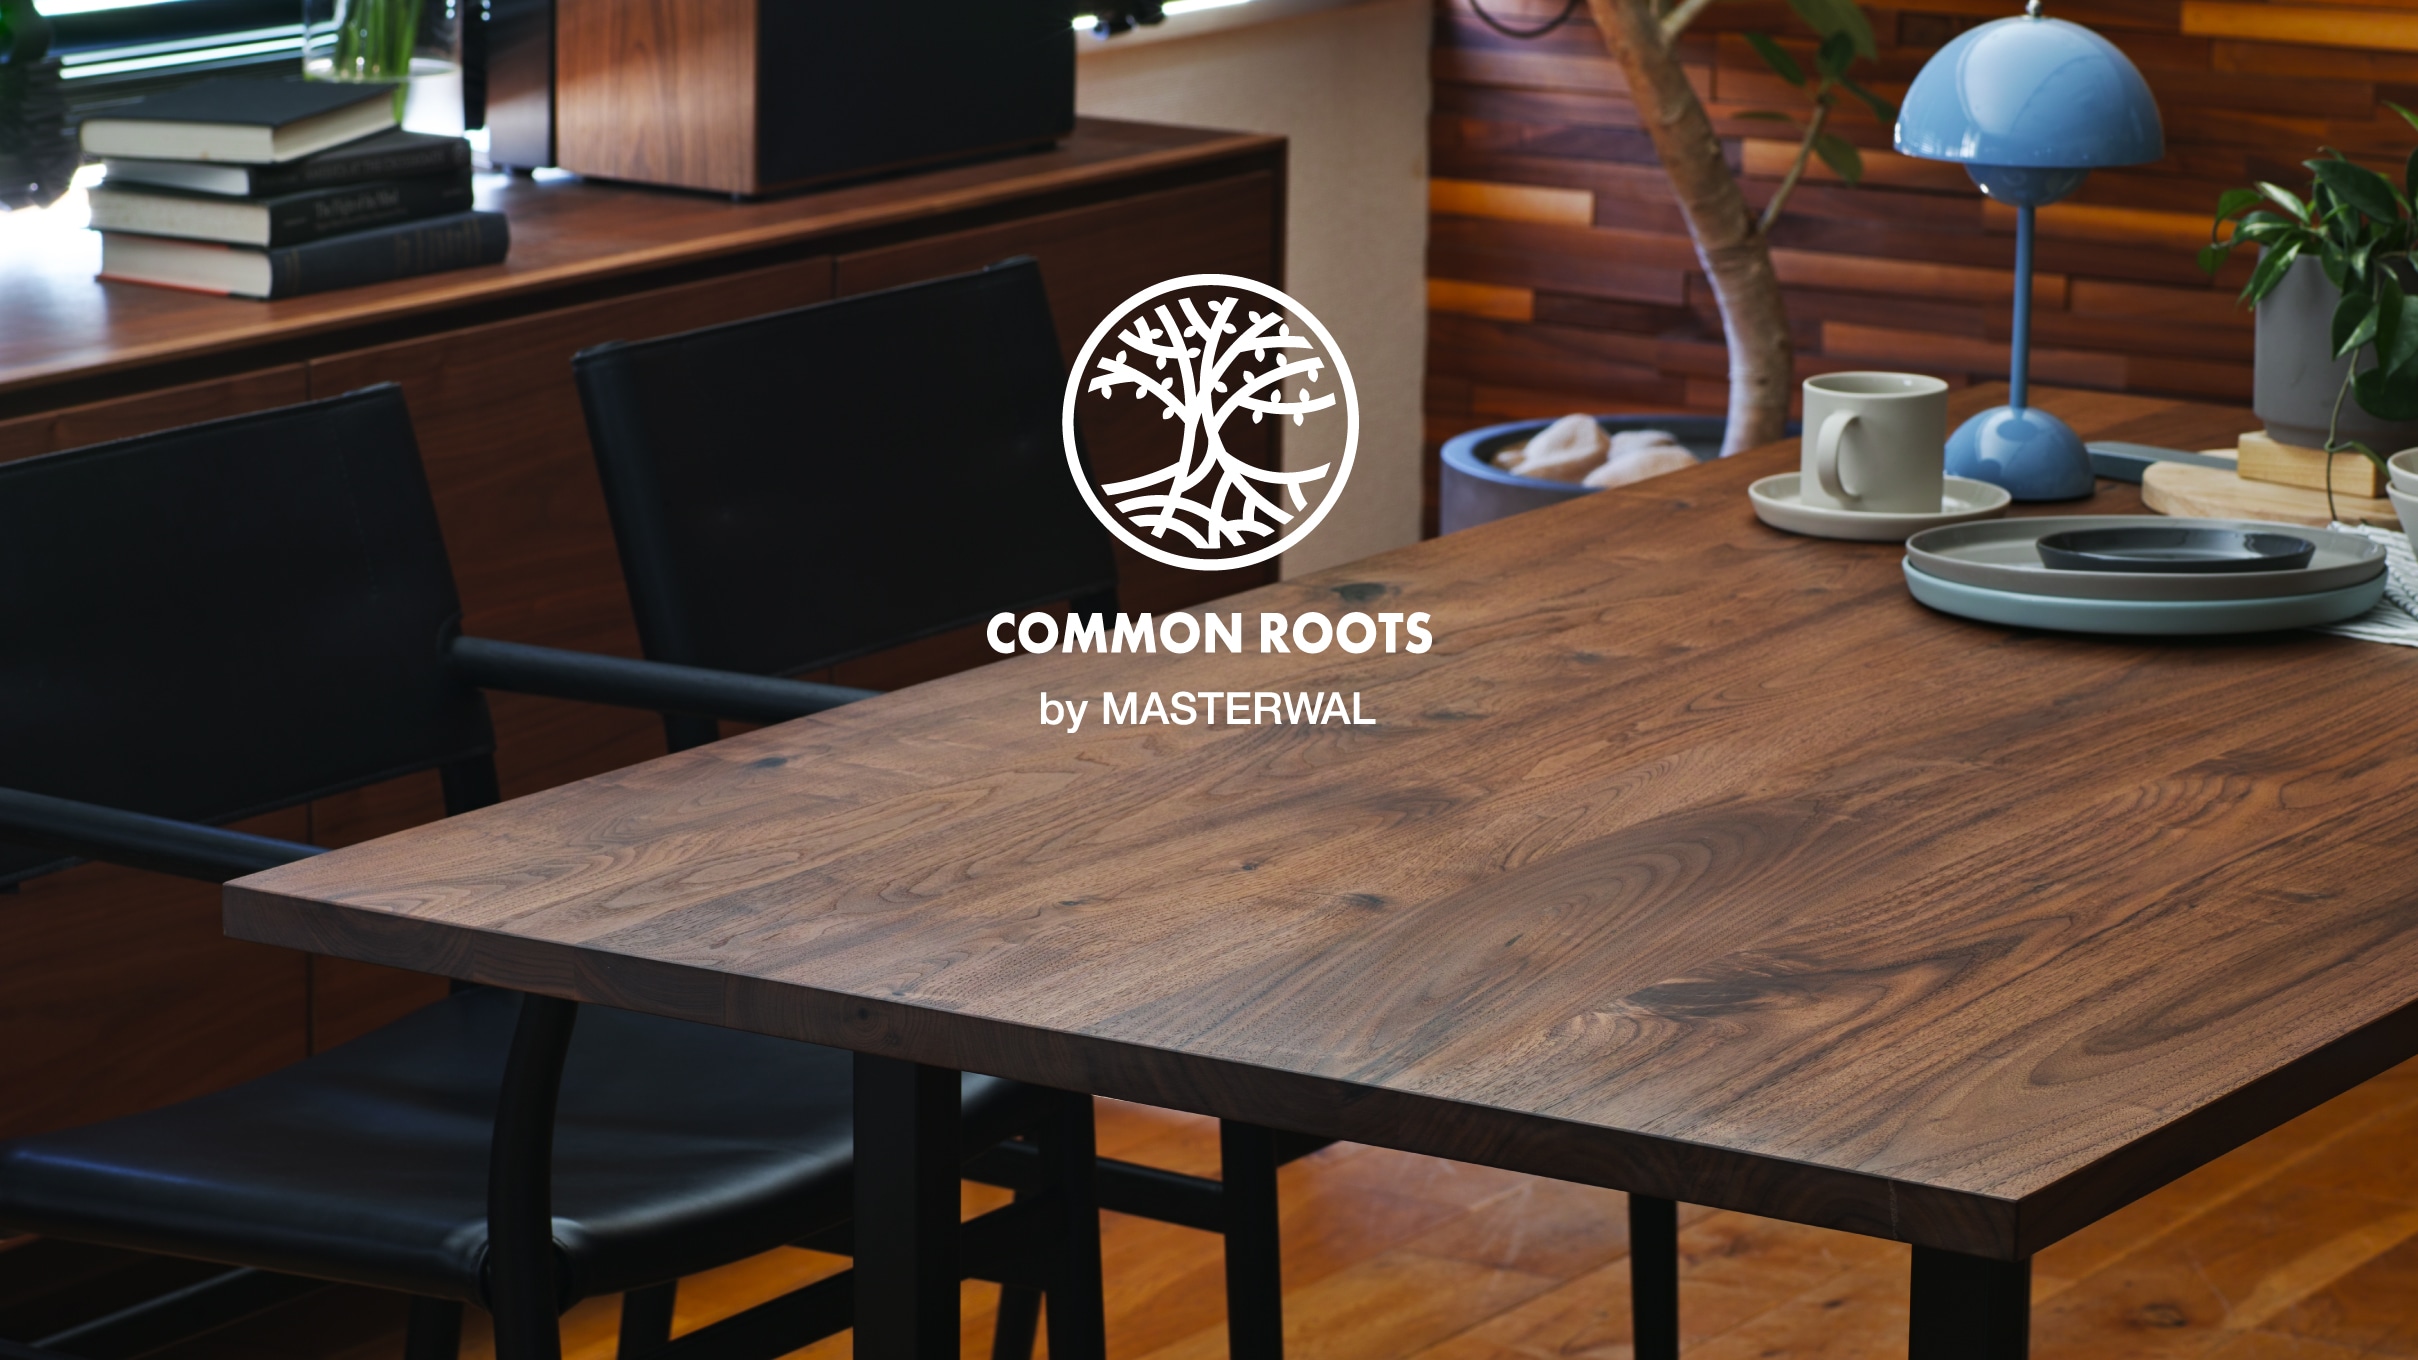 COMMON ROOTS